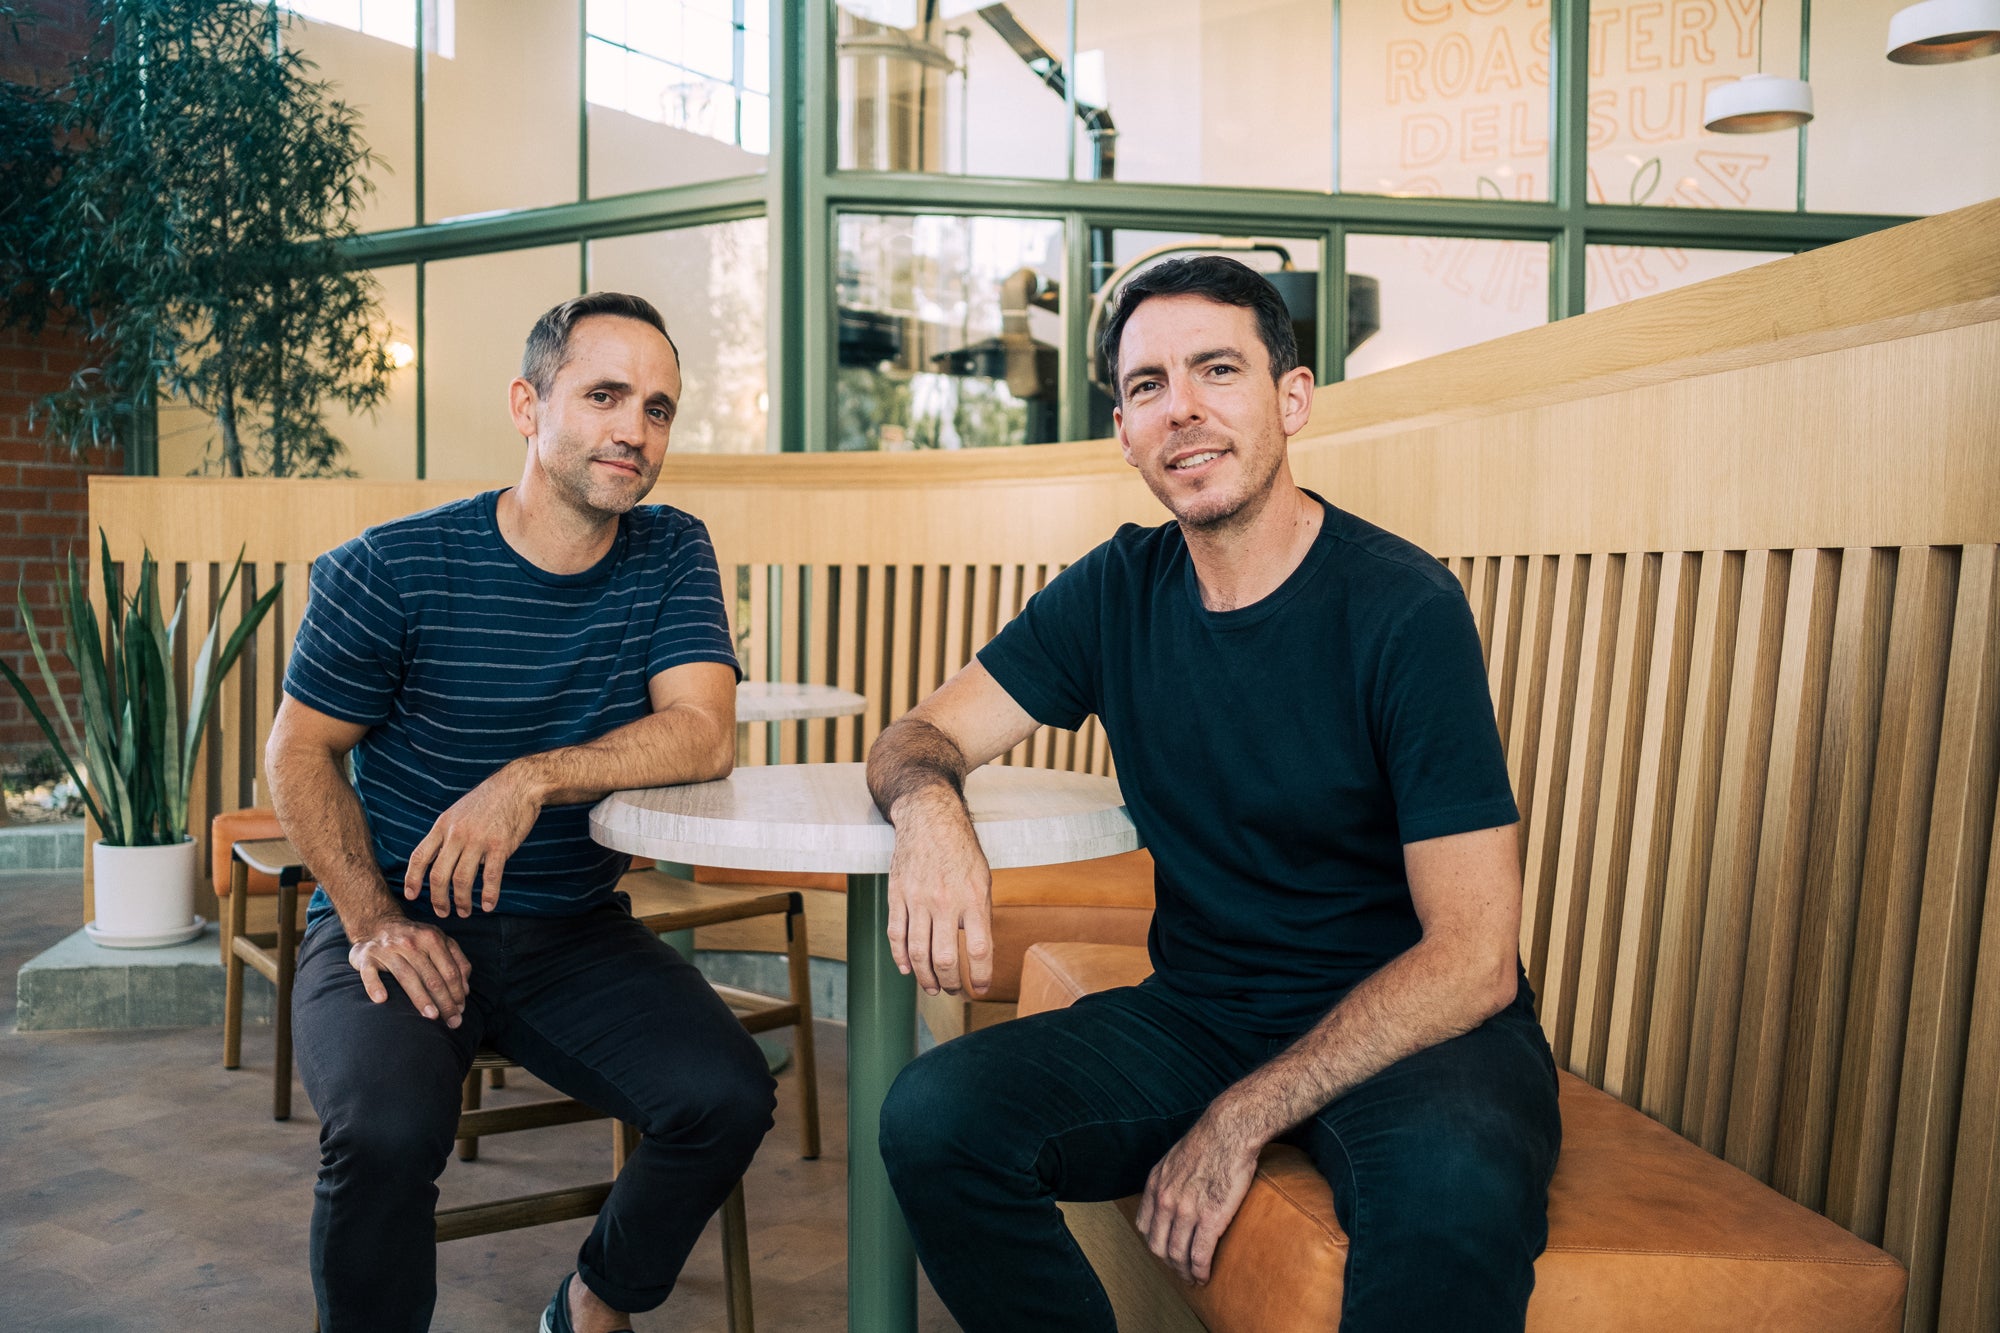 Verve Co-Founders, Ryan O'Donovan and Colby Barr